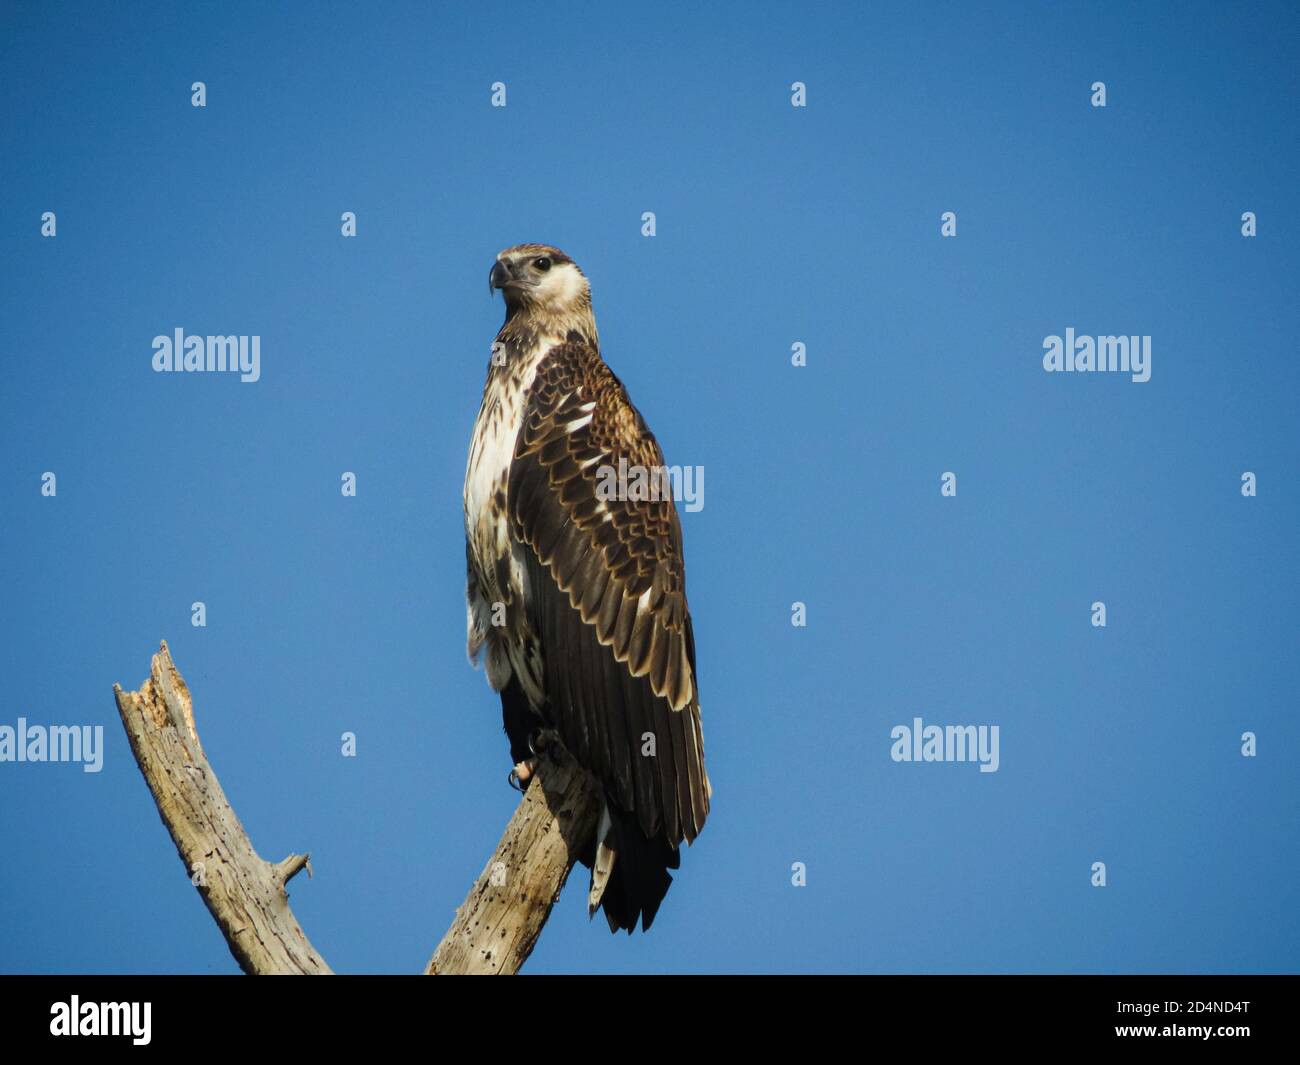 Juvenile African Fish Eagle sitting on a branch against the blue sky Stock Photo